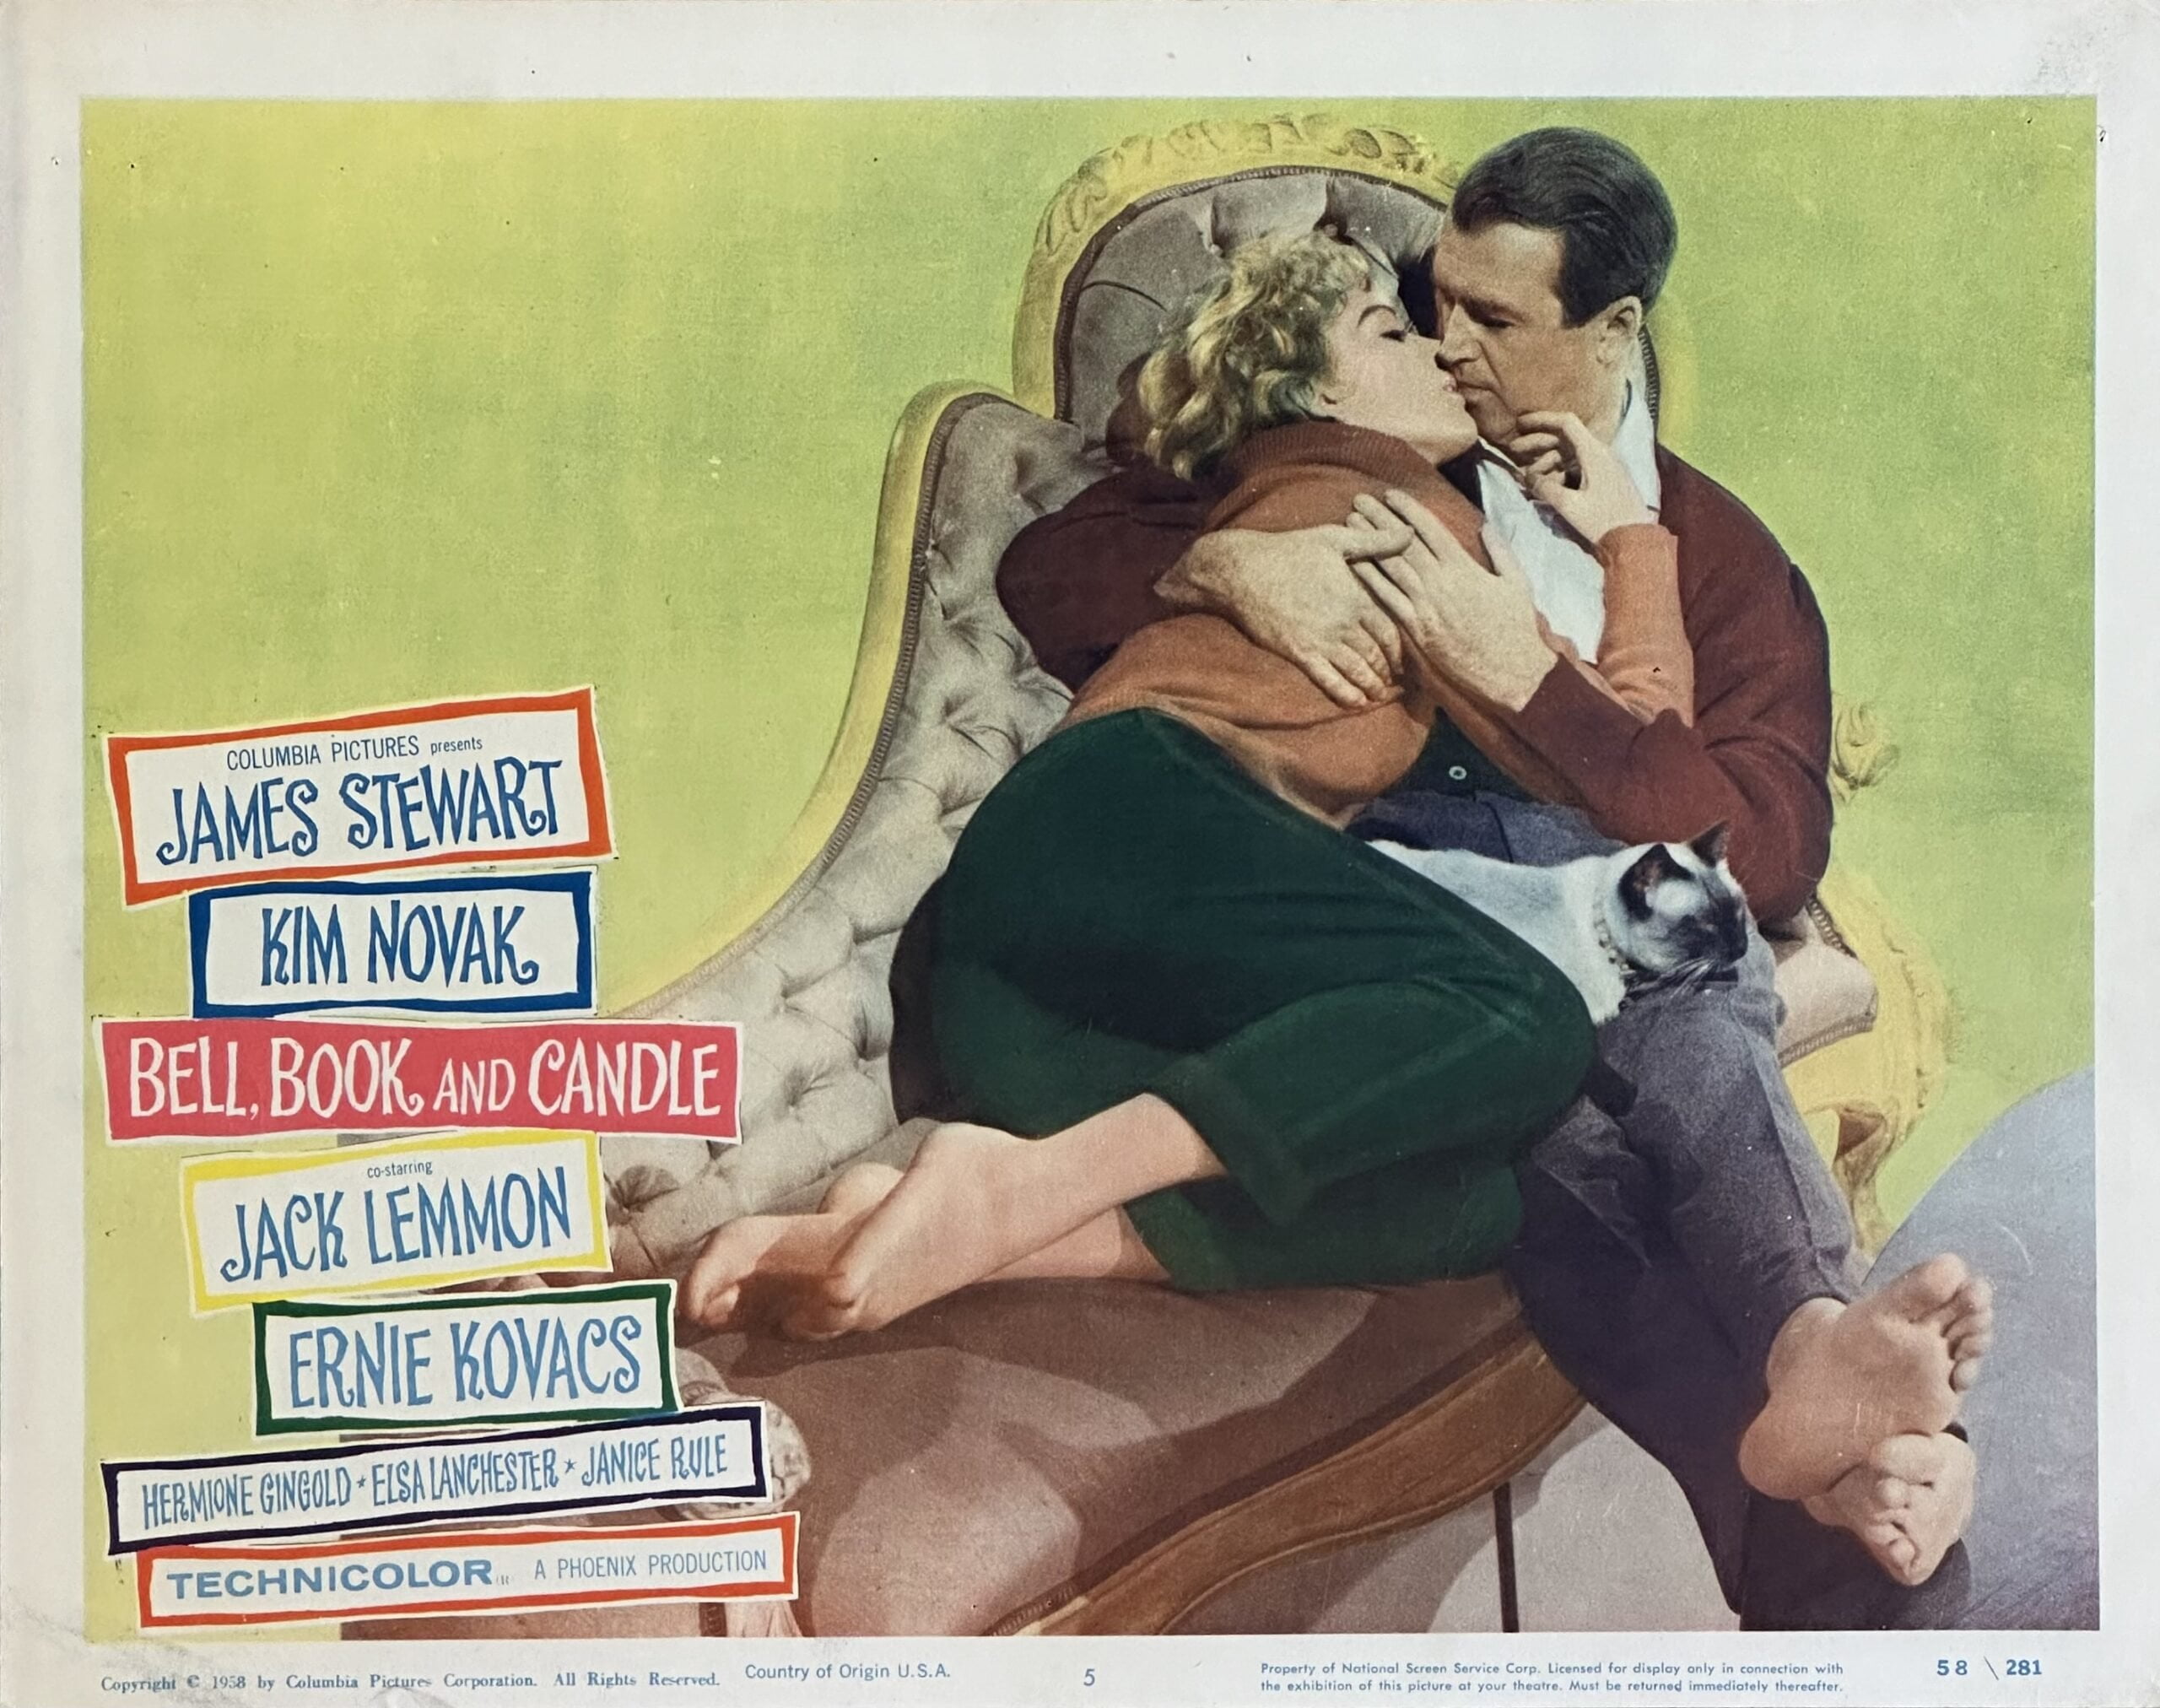 Original vintage cinema lobby card for Bell, Book and Candle